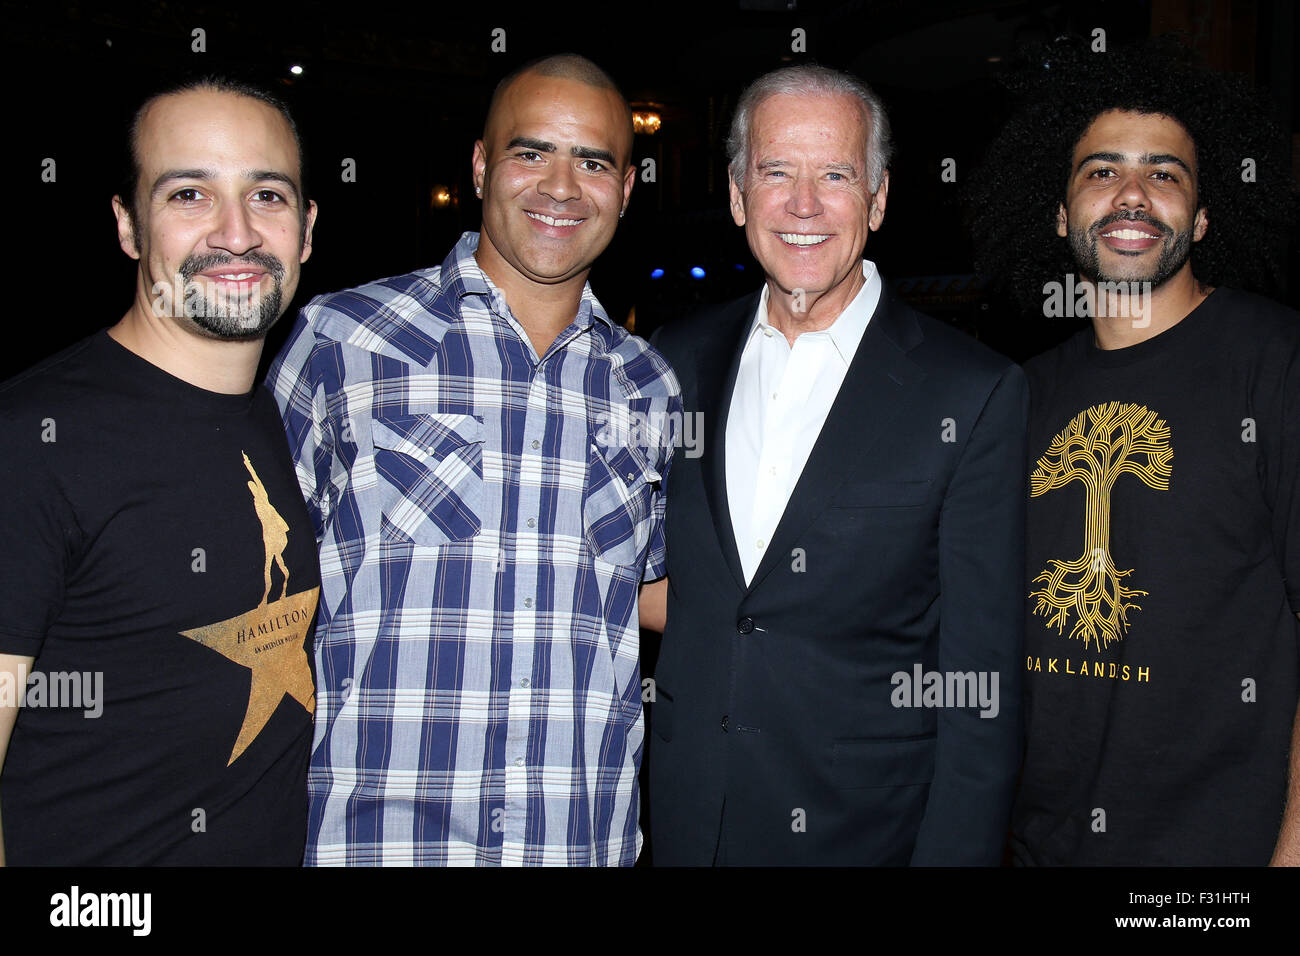 fryser Begrænset Ældre borgere Vice President of the United States Joe Biden visits the cast of the  Broadway musical Hamilton at the Richard Rodgers Theatre. Featuring:  Lin-Manuel Miranda, Christopher Jackson, Joe Biden, Daveed Diggs Where: New